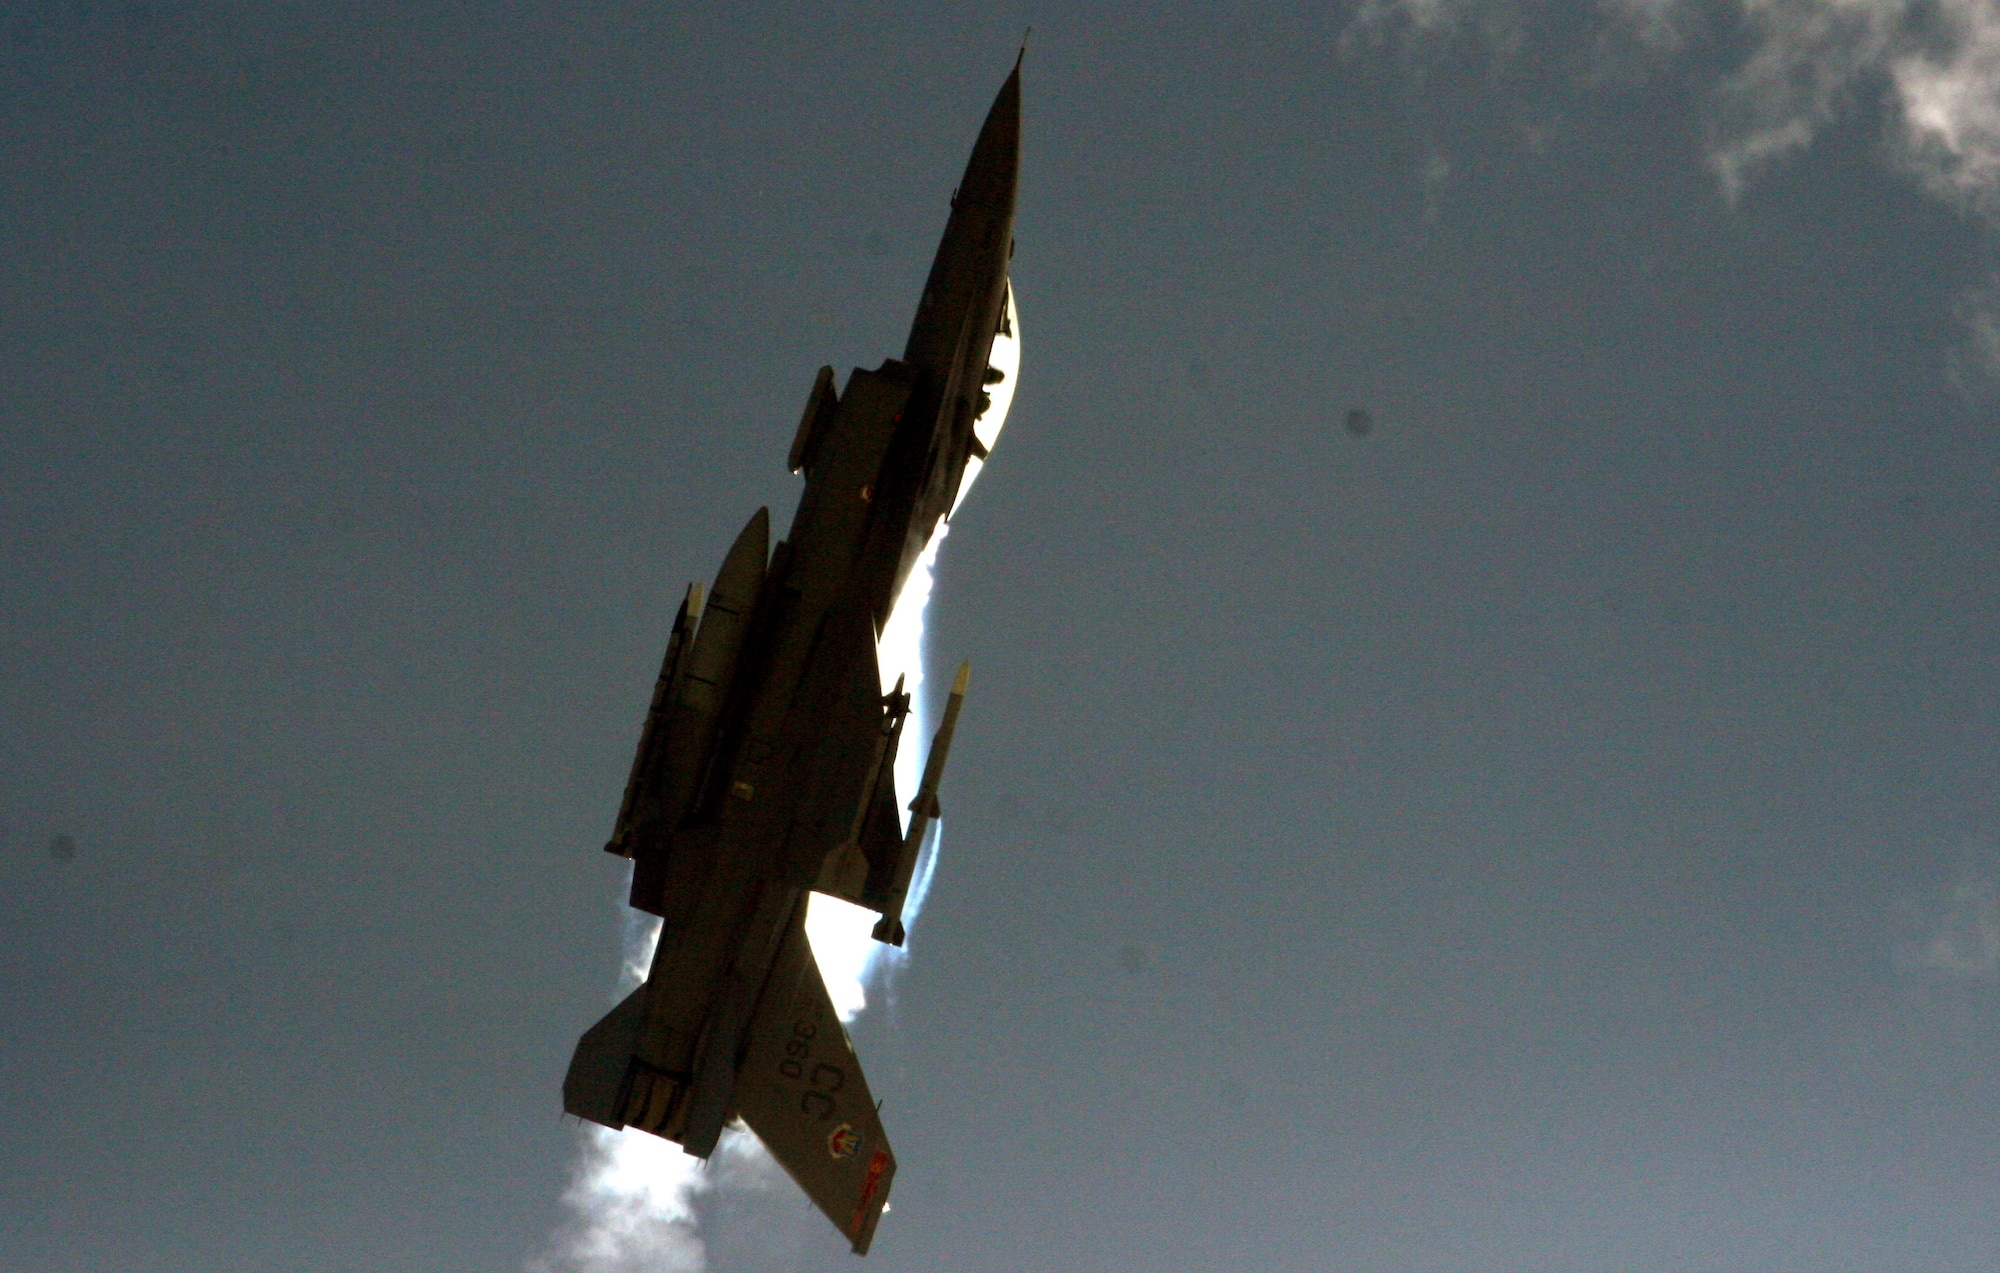 This F-16 demonstrates its great range of maneuverability here during aerial intercept exercises. While the air-to-ground combat role is extremely important in the continuing Global War on Terror, the Air Force must maintain the capability to adapt to any threat to the United States or her allies. The F-16 C/D model is capable of withstanding up to nine G’s, which is nine times the force of gravity, during combat maneuvers. This capability exceeds that of other fighter aircraft in the world and keeps the F-16 at the forefront of fighter aircraft superiority. (Air Force Photo/Senior Master Sgt. Mahmoud Rasouliyan)